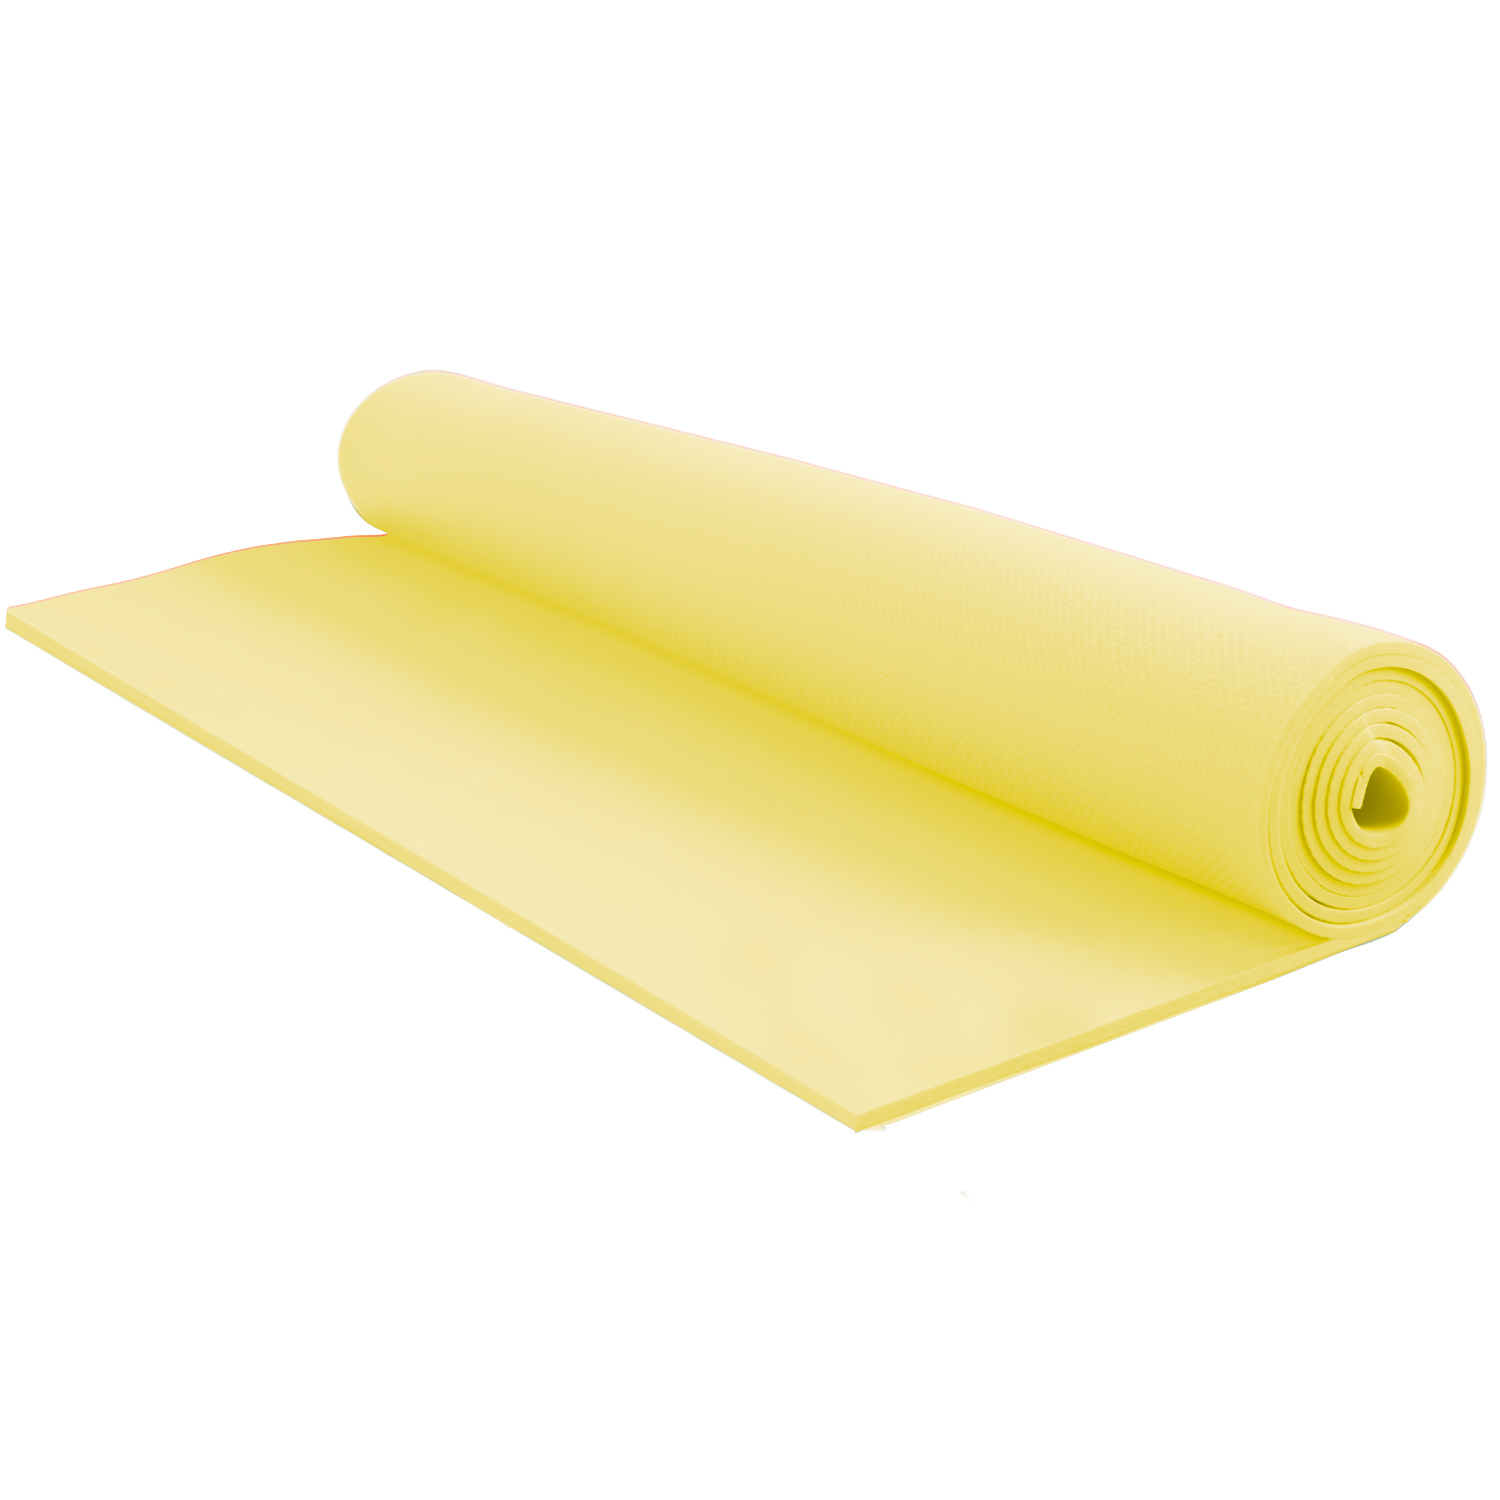 Yoga mat for exercise & fitness - Pale yellow